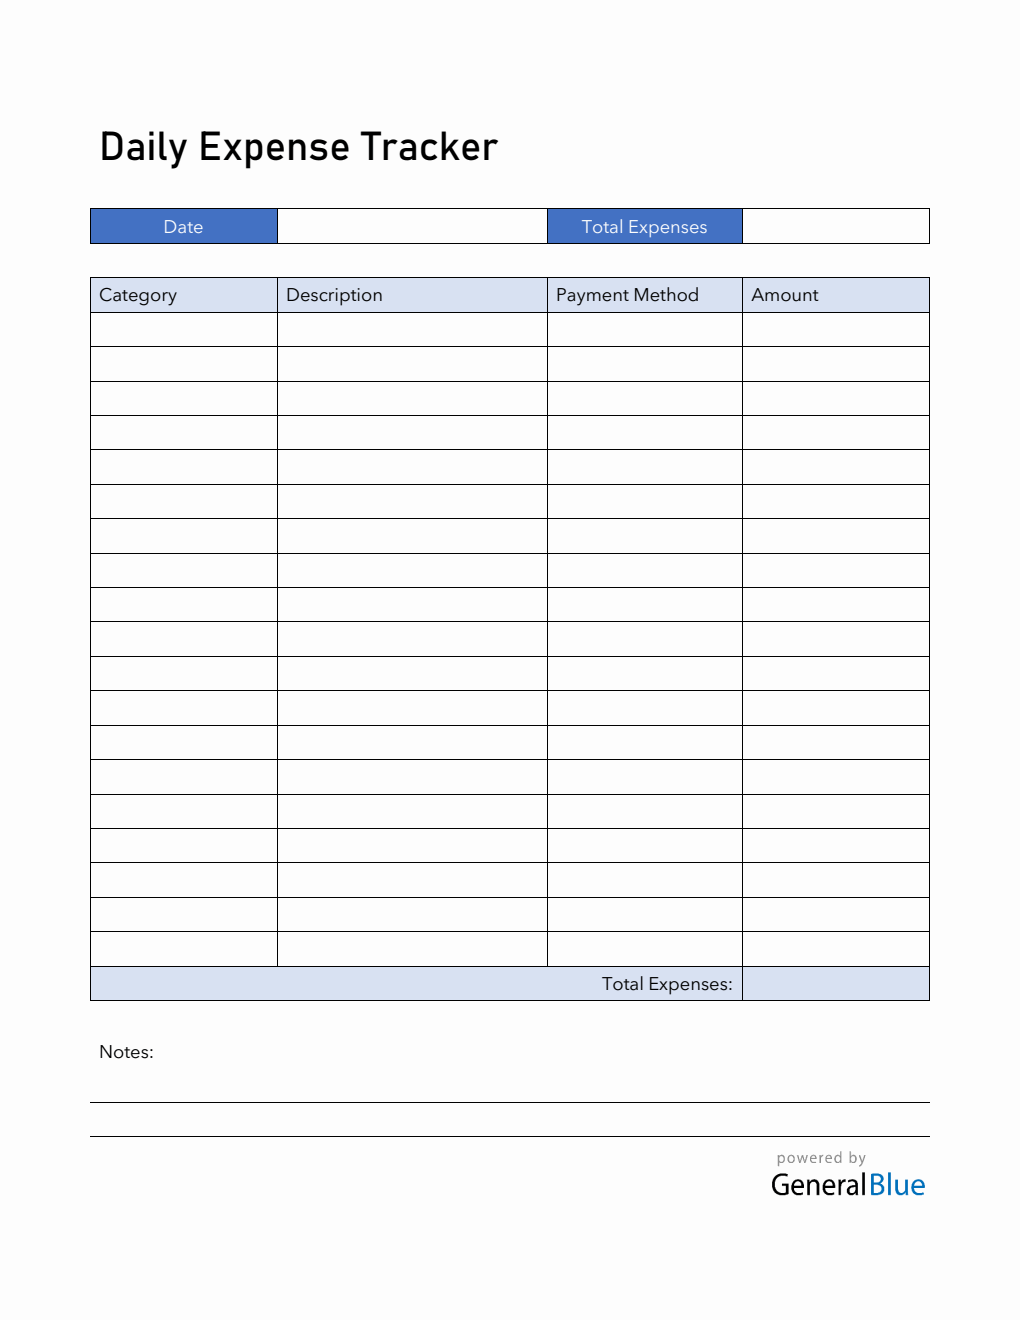 Daily Expense Tracker in Word (Blue)